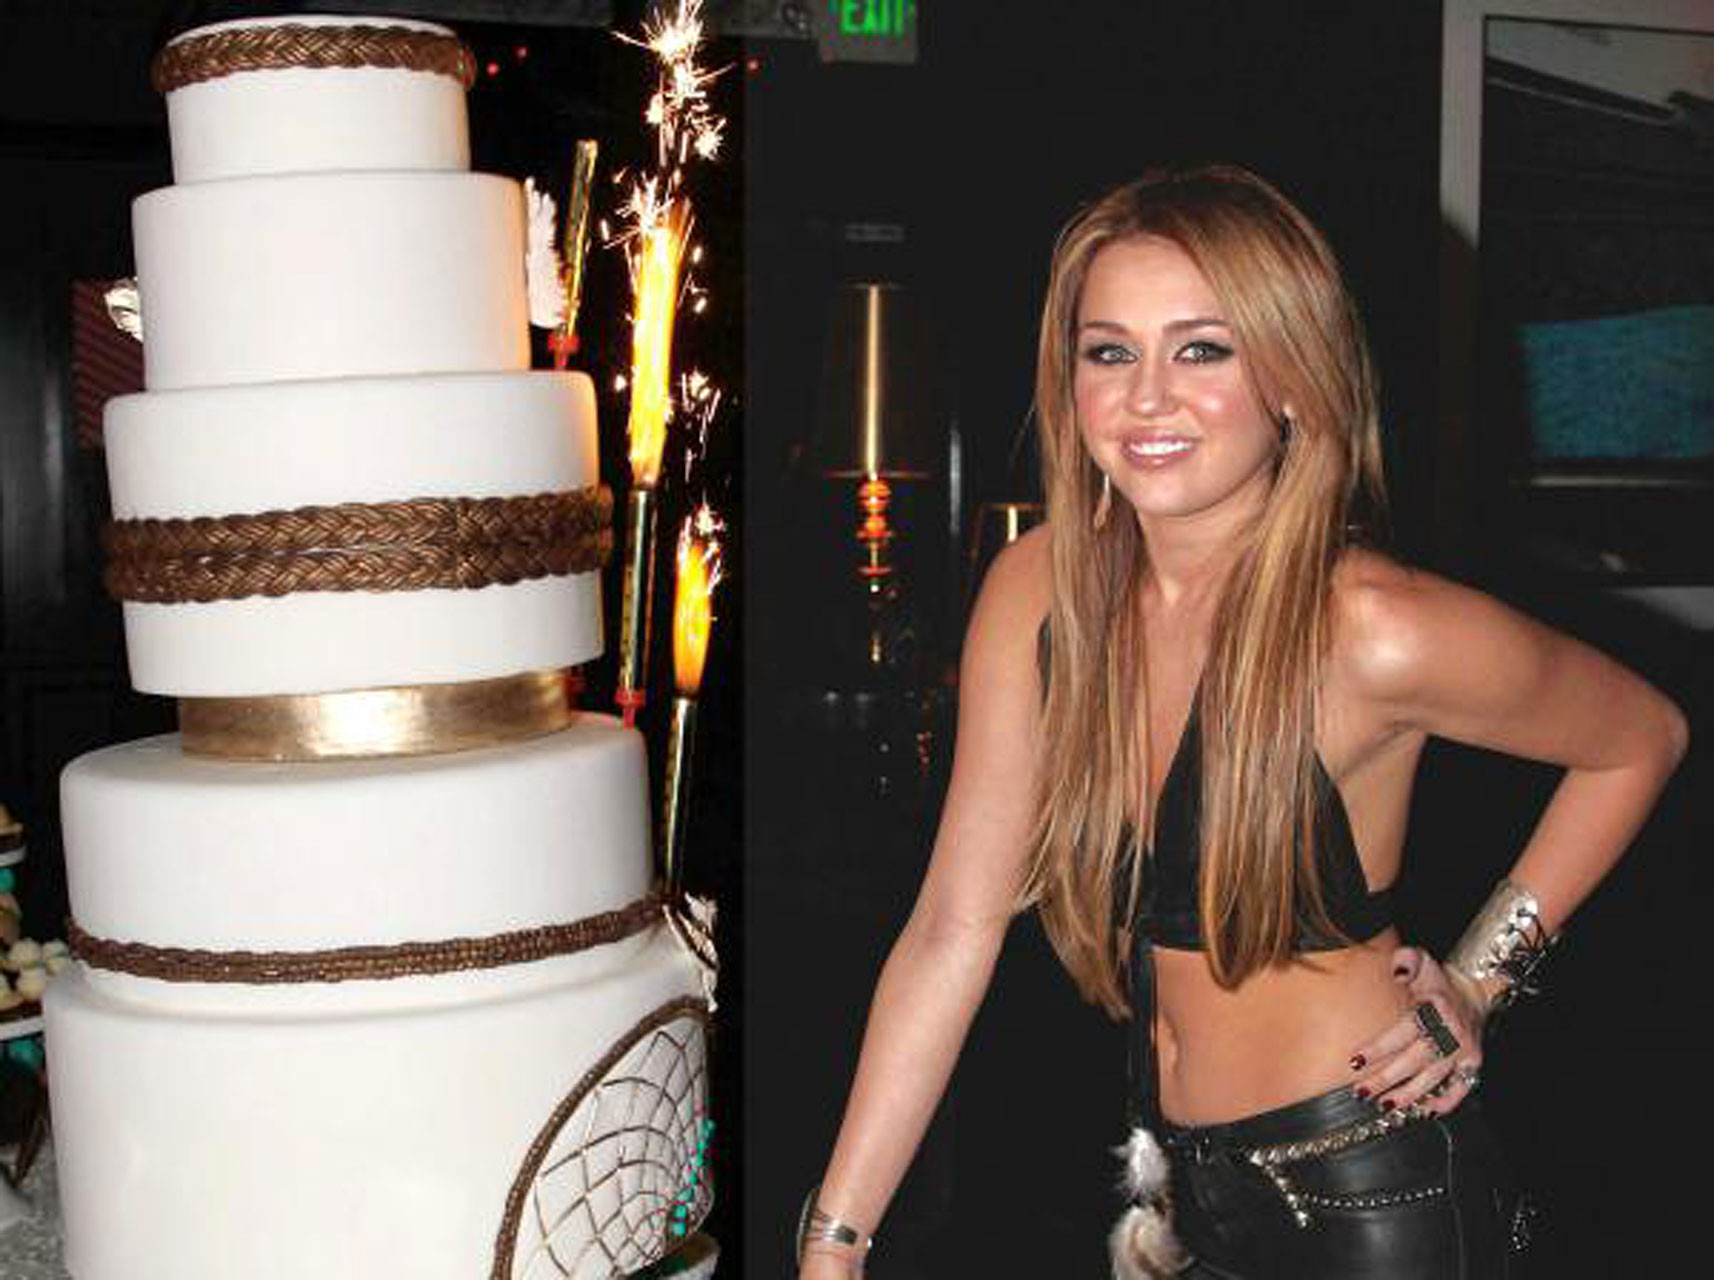 Miley Cyrus young and cute singer celebrated her eighteenth birthday #75325438